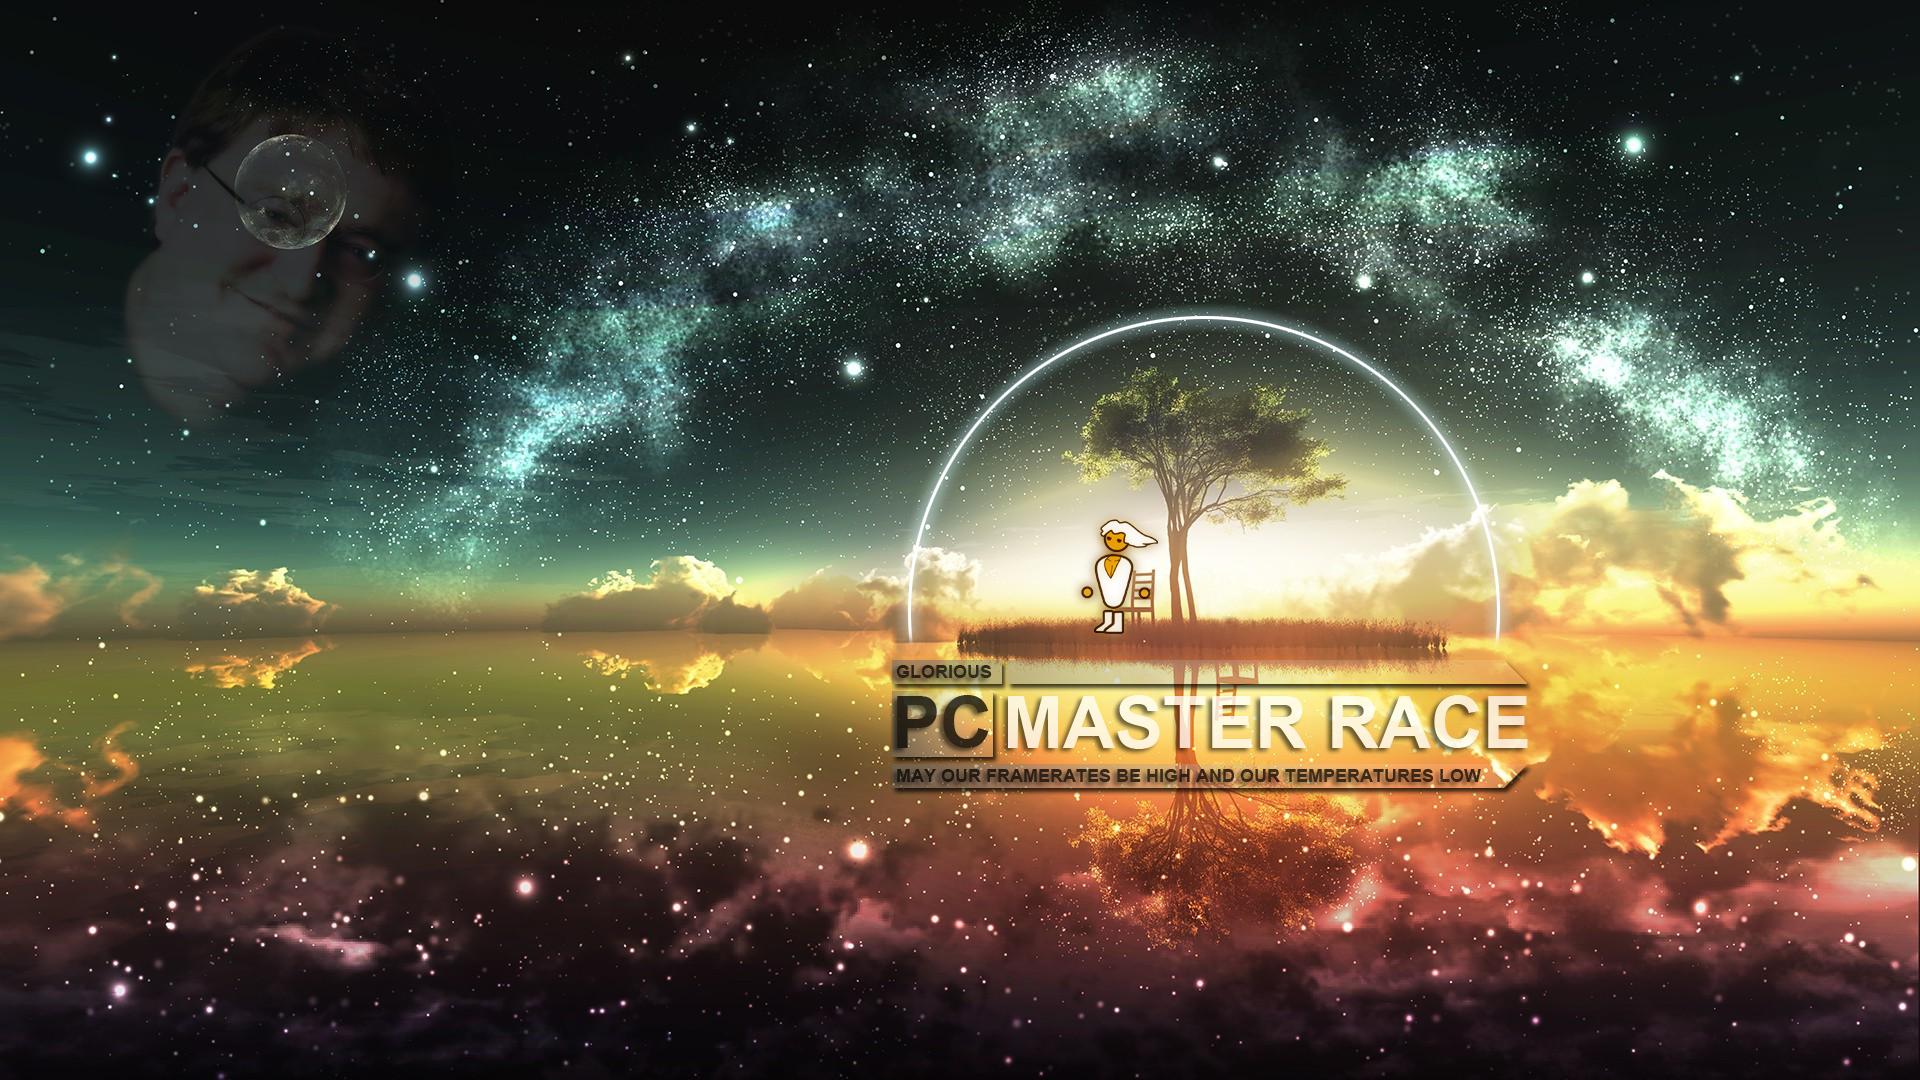 Pcmr Wallpapers